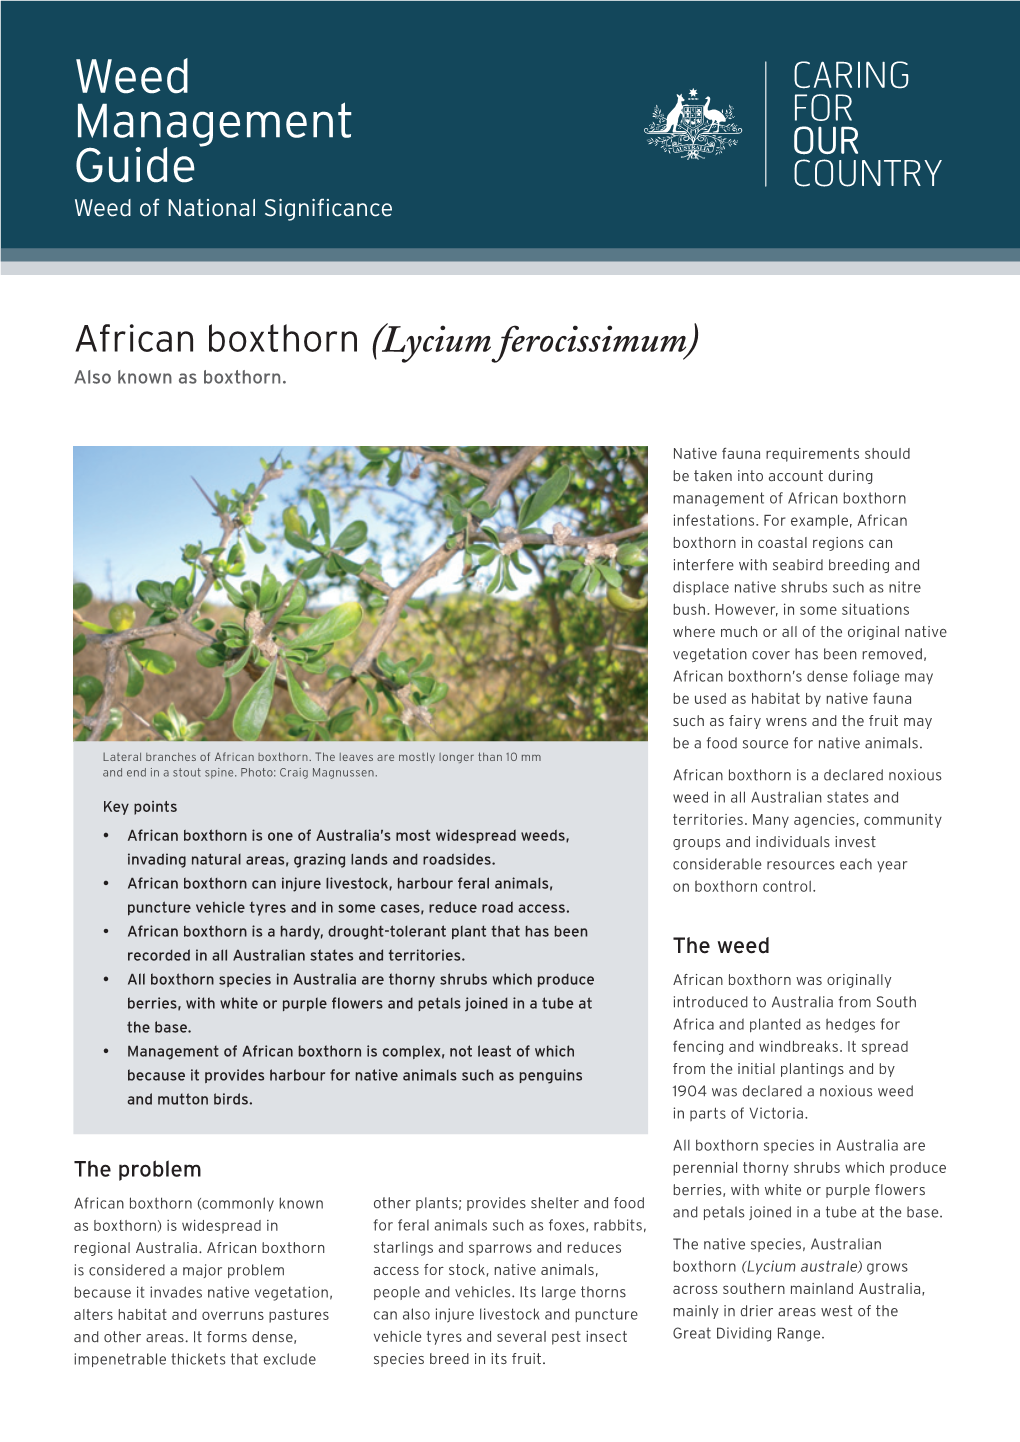 African Boxthorn Weed Management Guide